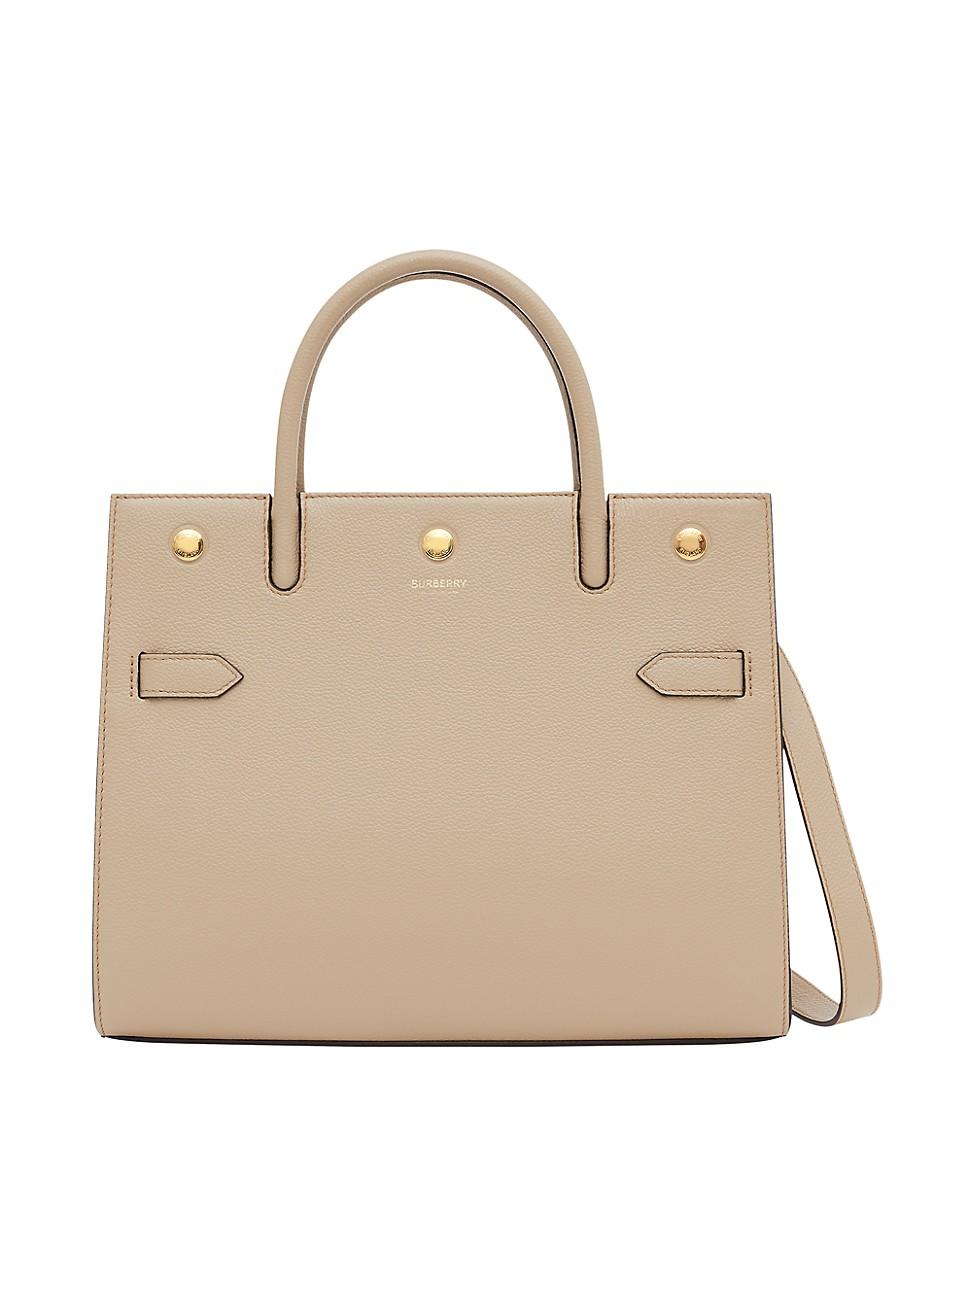 Burberry Medium Title Leather Satchel in Natural